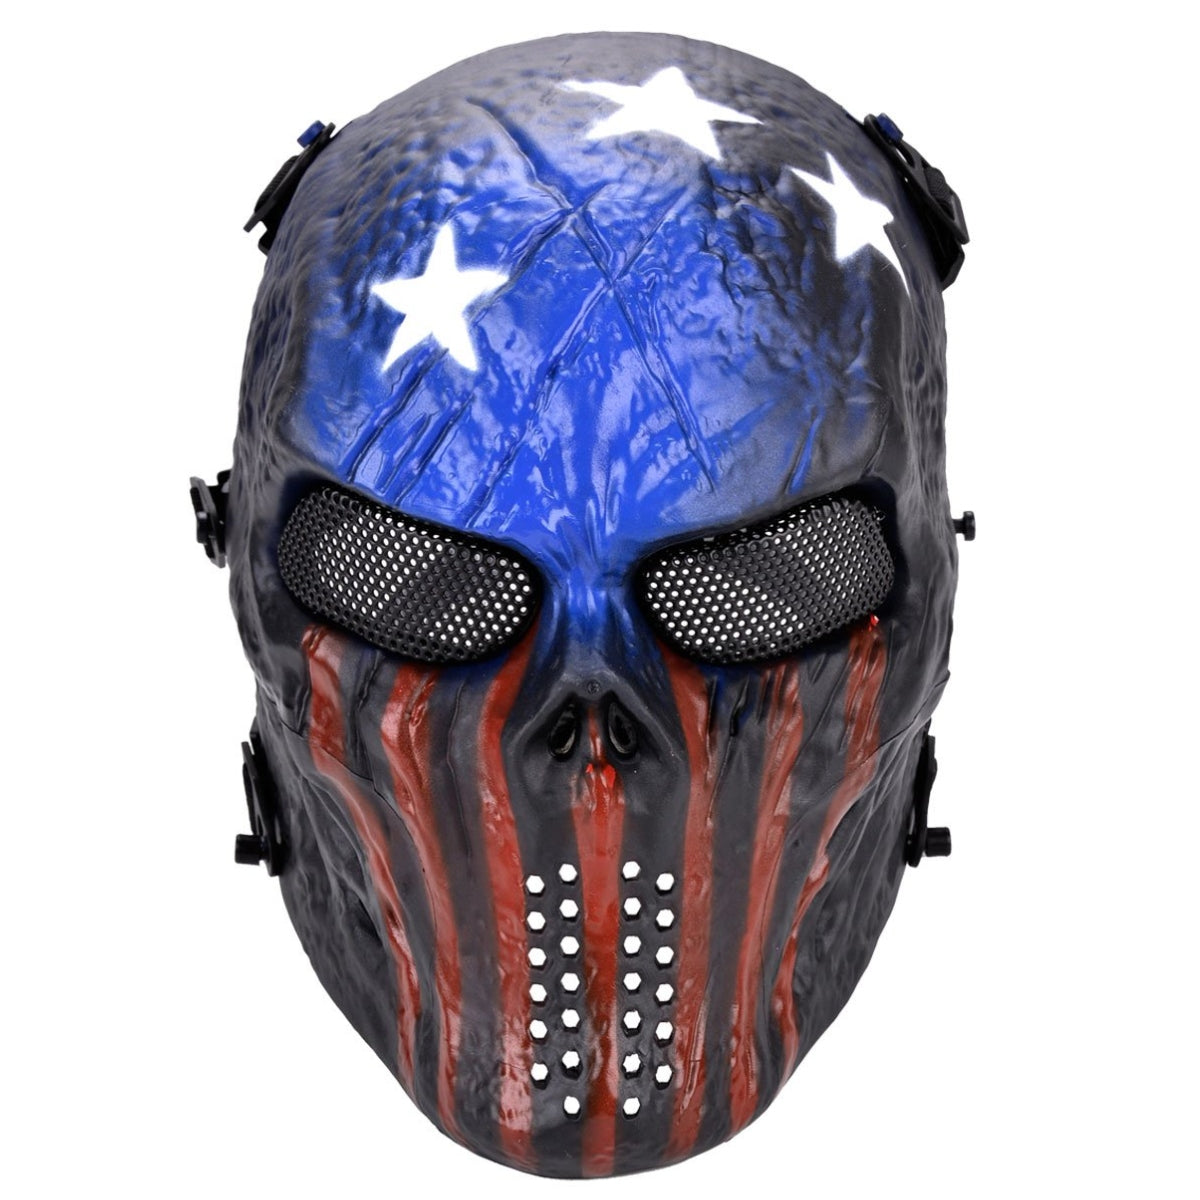 TRIMEX PAINTED SKULL AIRSOFT USA TEAM MASK